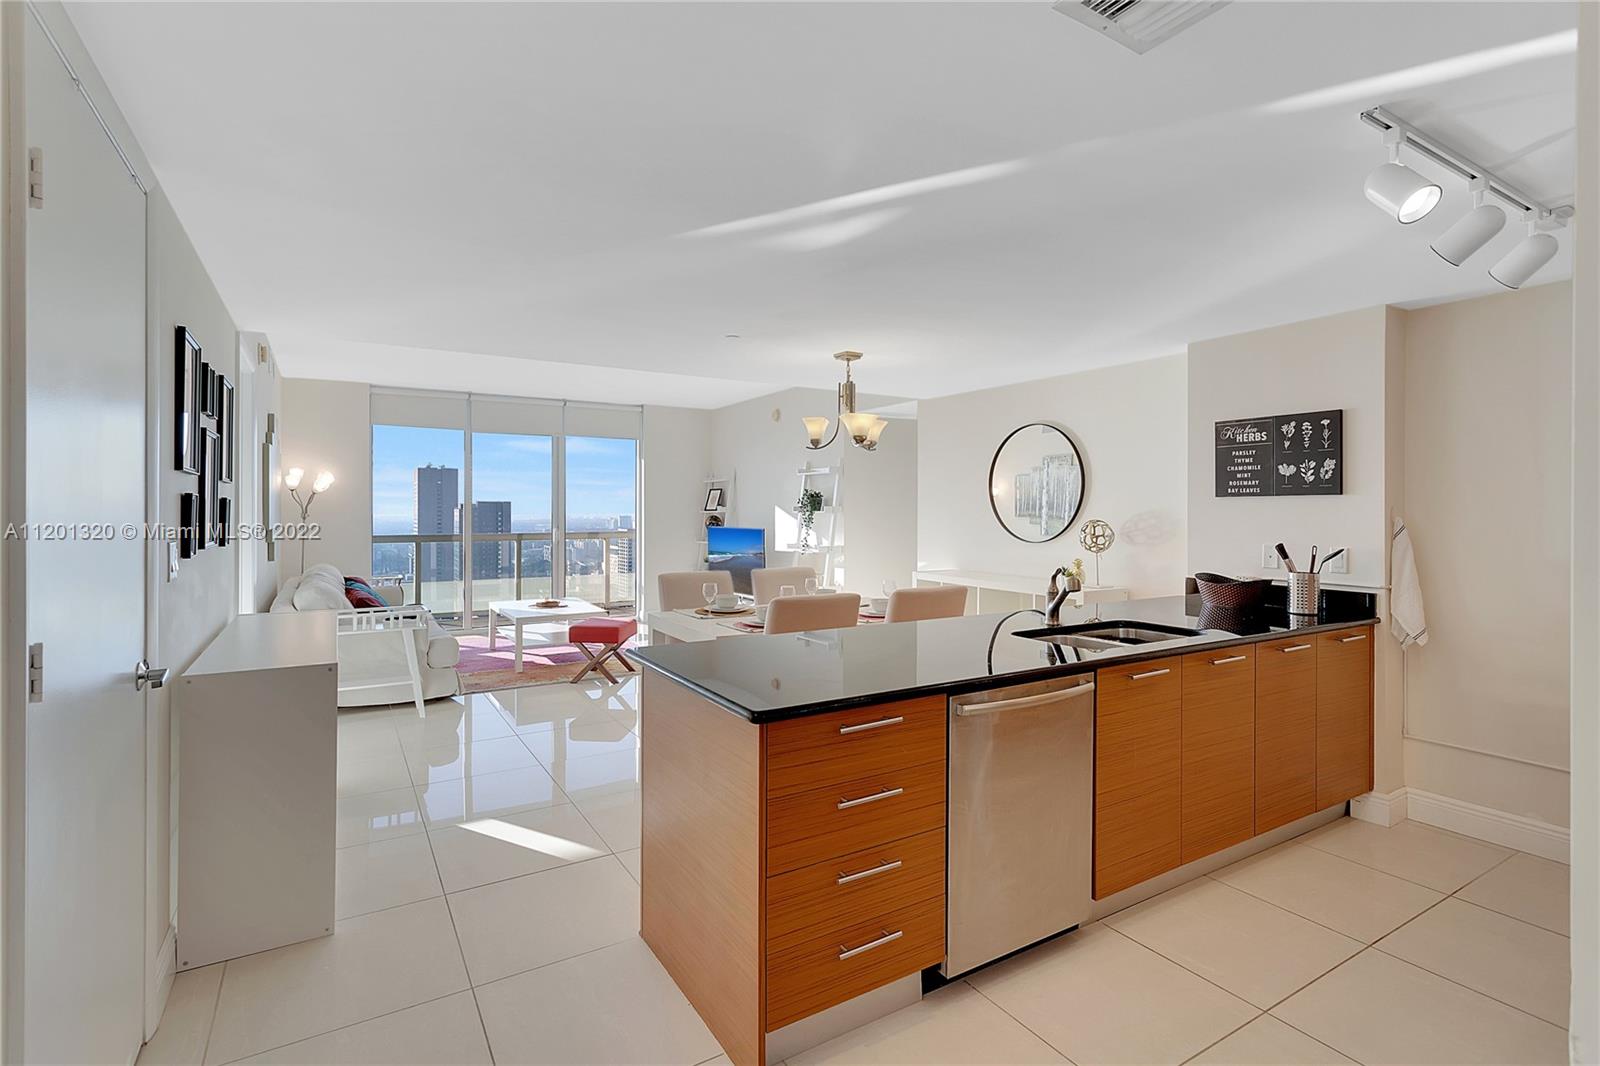 Gorgeous furnished 2 bedroom, 2 bath condo at 50 Biscayne Blvd.  The property boasts an extensive wrap around balcony with sweeping views of the city and Biscayne Bay. This open floor layout offers a spacious design and comes equipped with granite countertops, stainless steel appliances, porcelain floor & window treatments. Property is available fully furnished and is centrally located with walking distance to many places of interest including Whole Foods, Silverspot Cinema, Brickell, Bayside Marketplace and FTX arena. Comes with one assigned parking space.
Property is available July 15th 2022